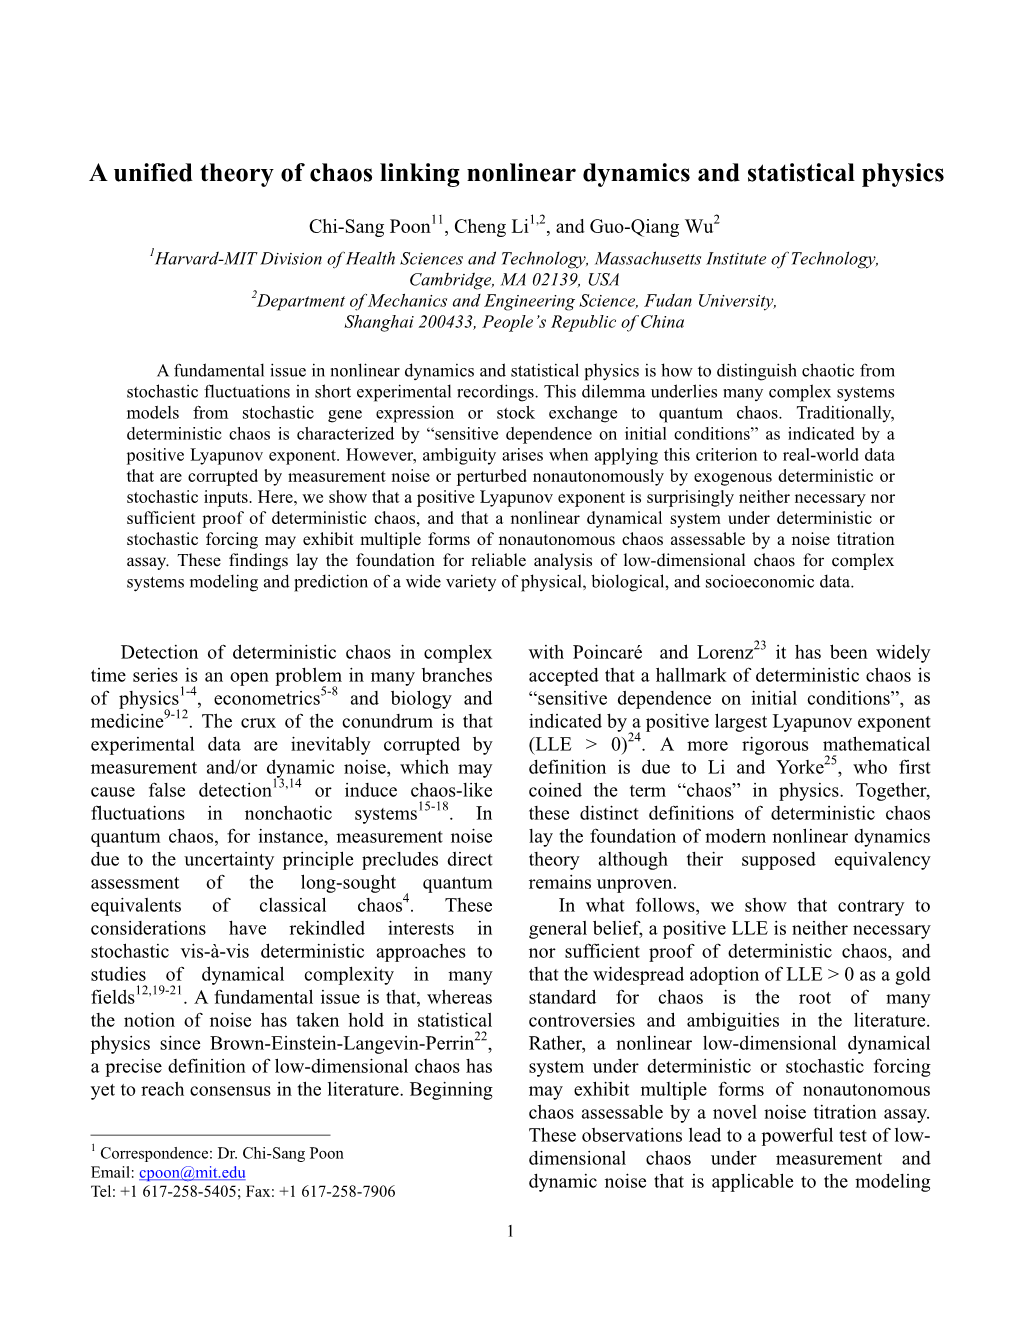 A Unified Theory of Chaos Linking Nonlinear Dynamics and Statistical Physics